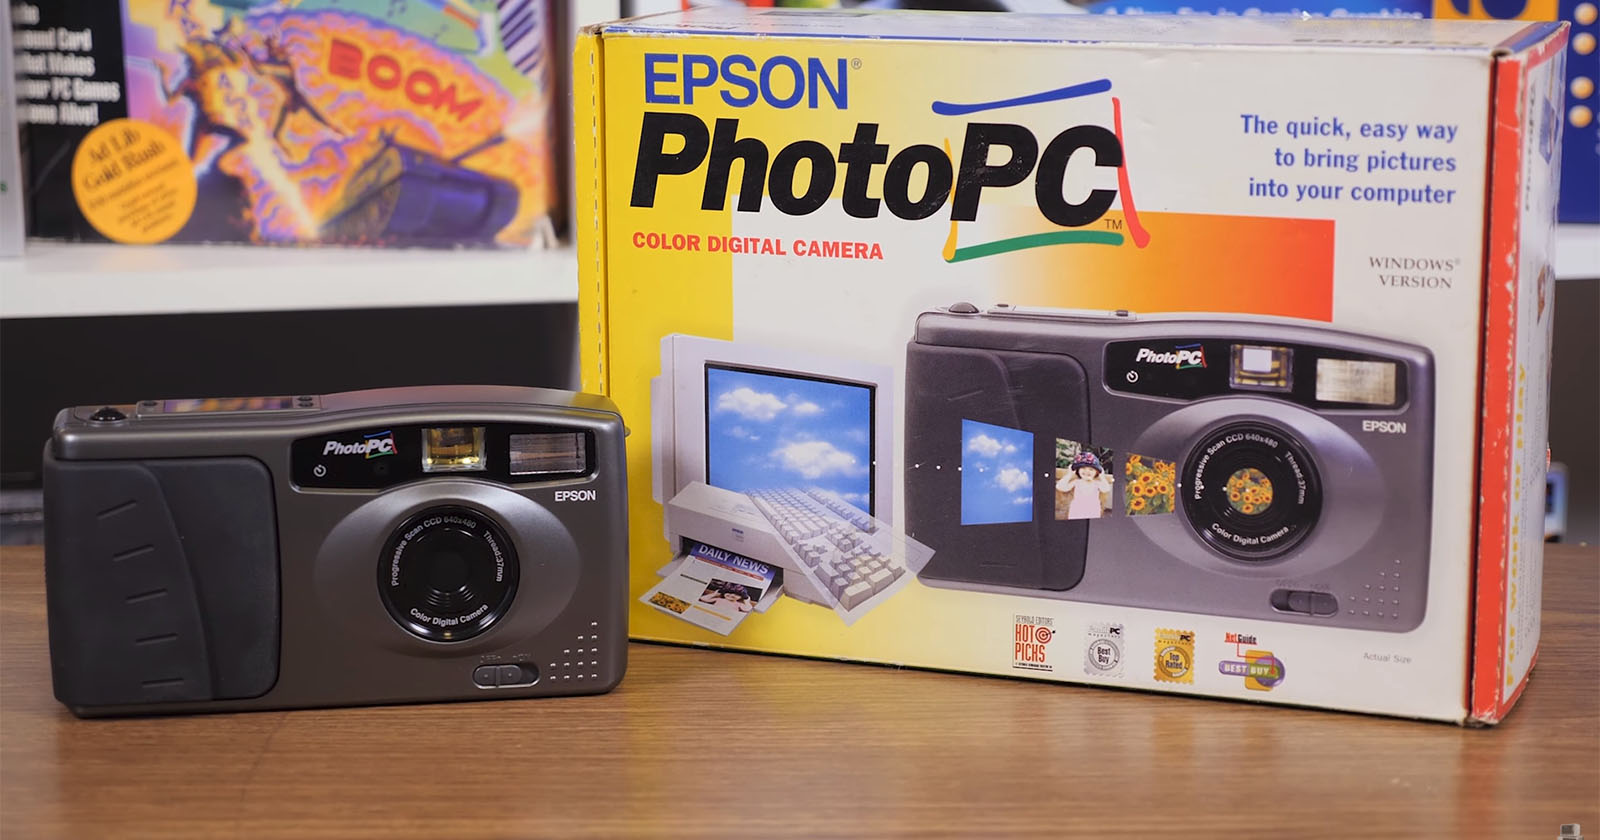 This is What Digital Cameras Were Like in 19951600 x 840